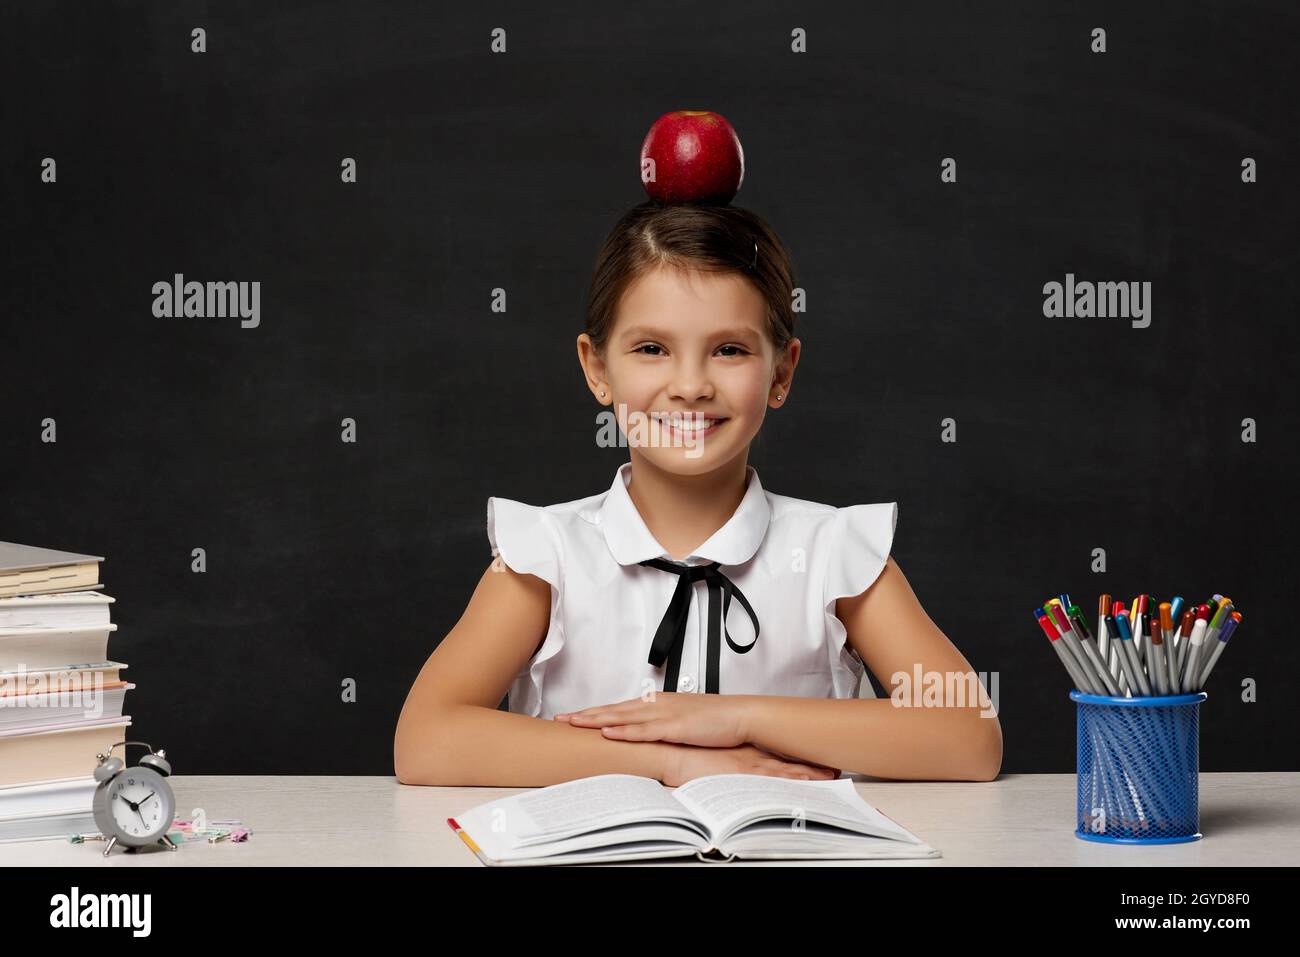 little child girl studying in classroom on background of blackboard. schoolgirl with red apple on her head. Back to school. Stock Photo